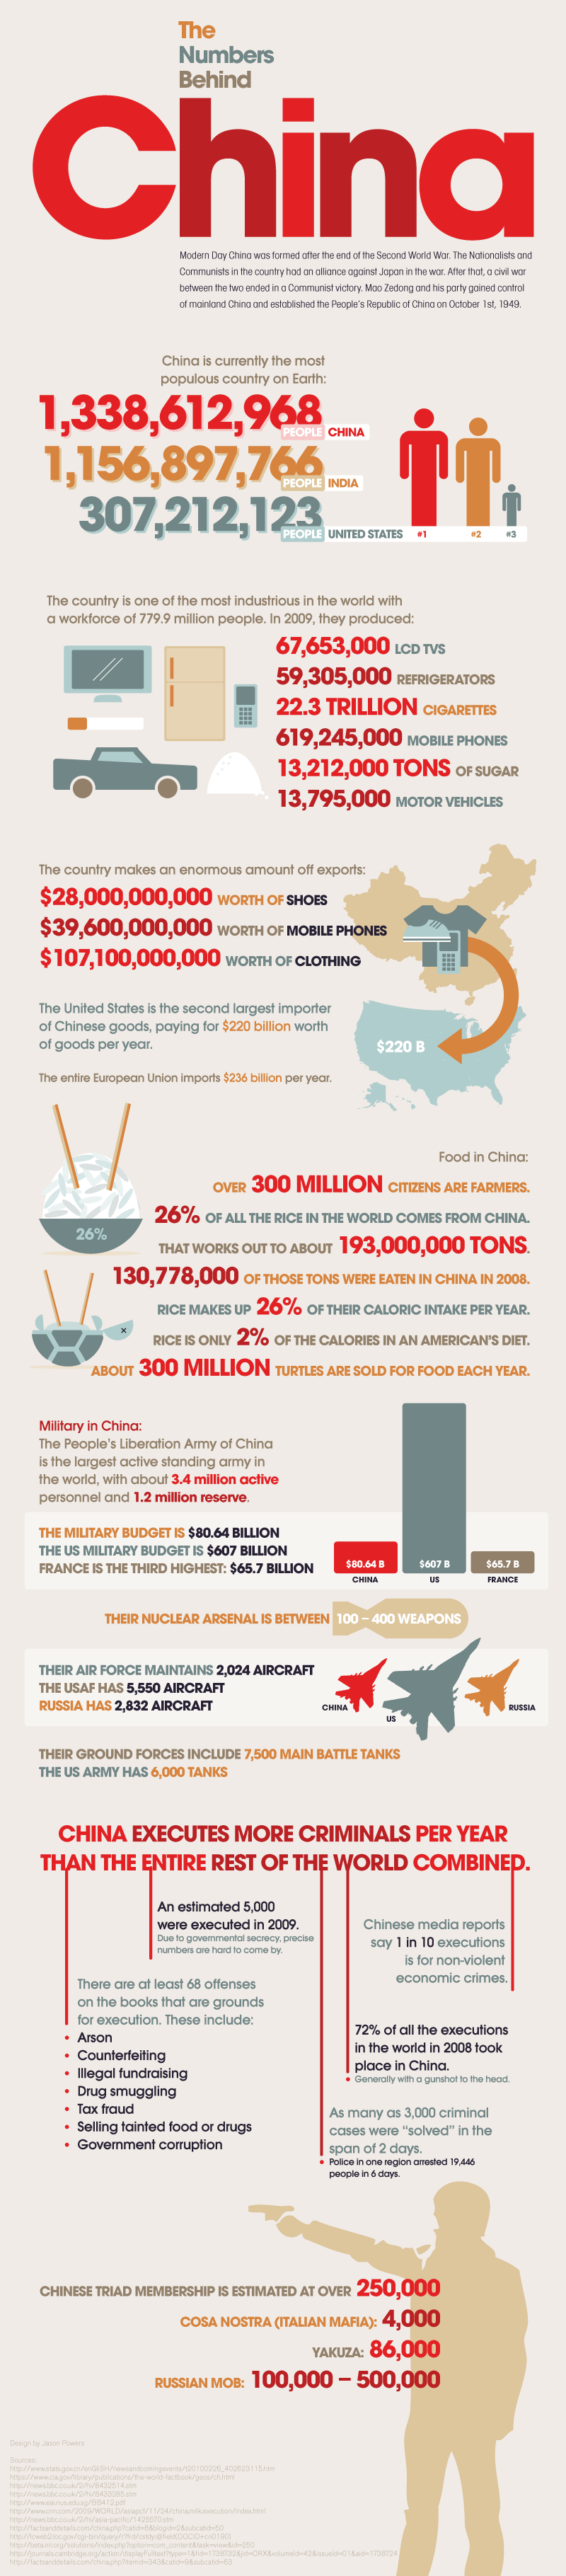 The Numbers Behind China [infographic]